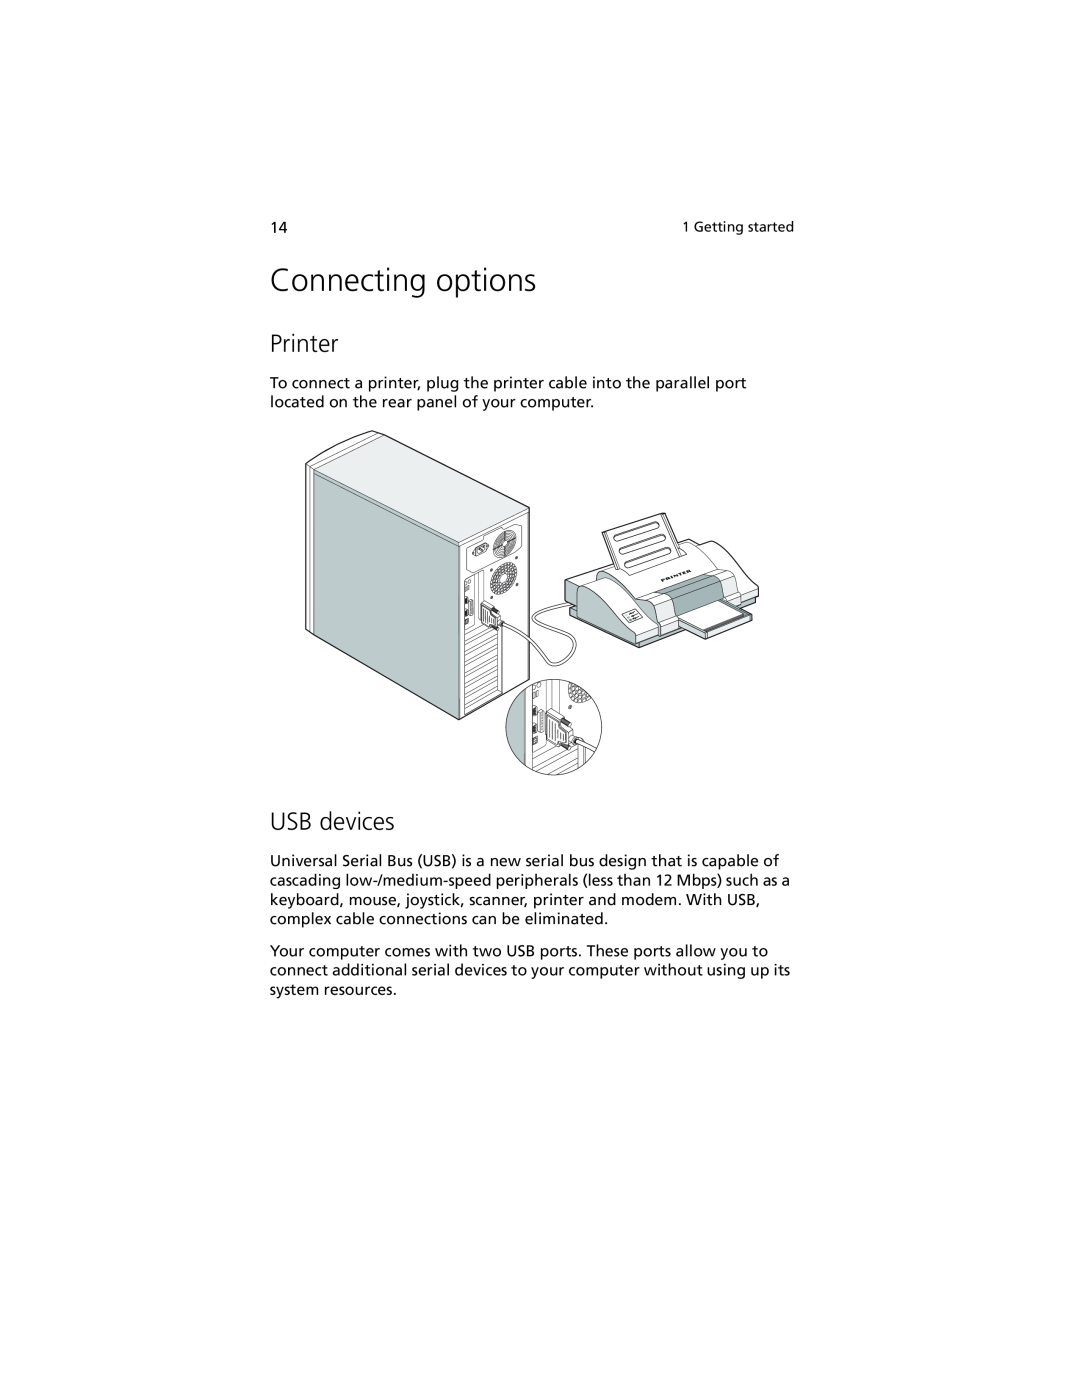 Acer G301 manual Connecting options, Printer, USB devices 